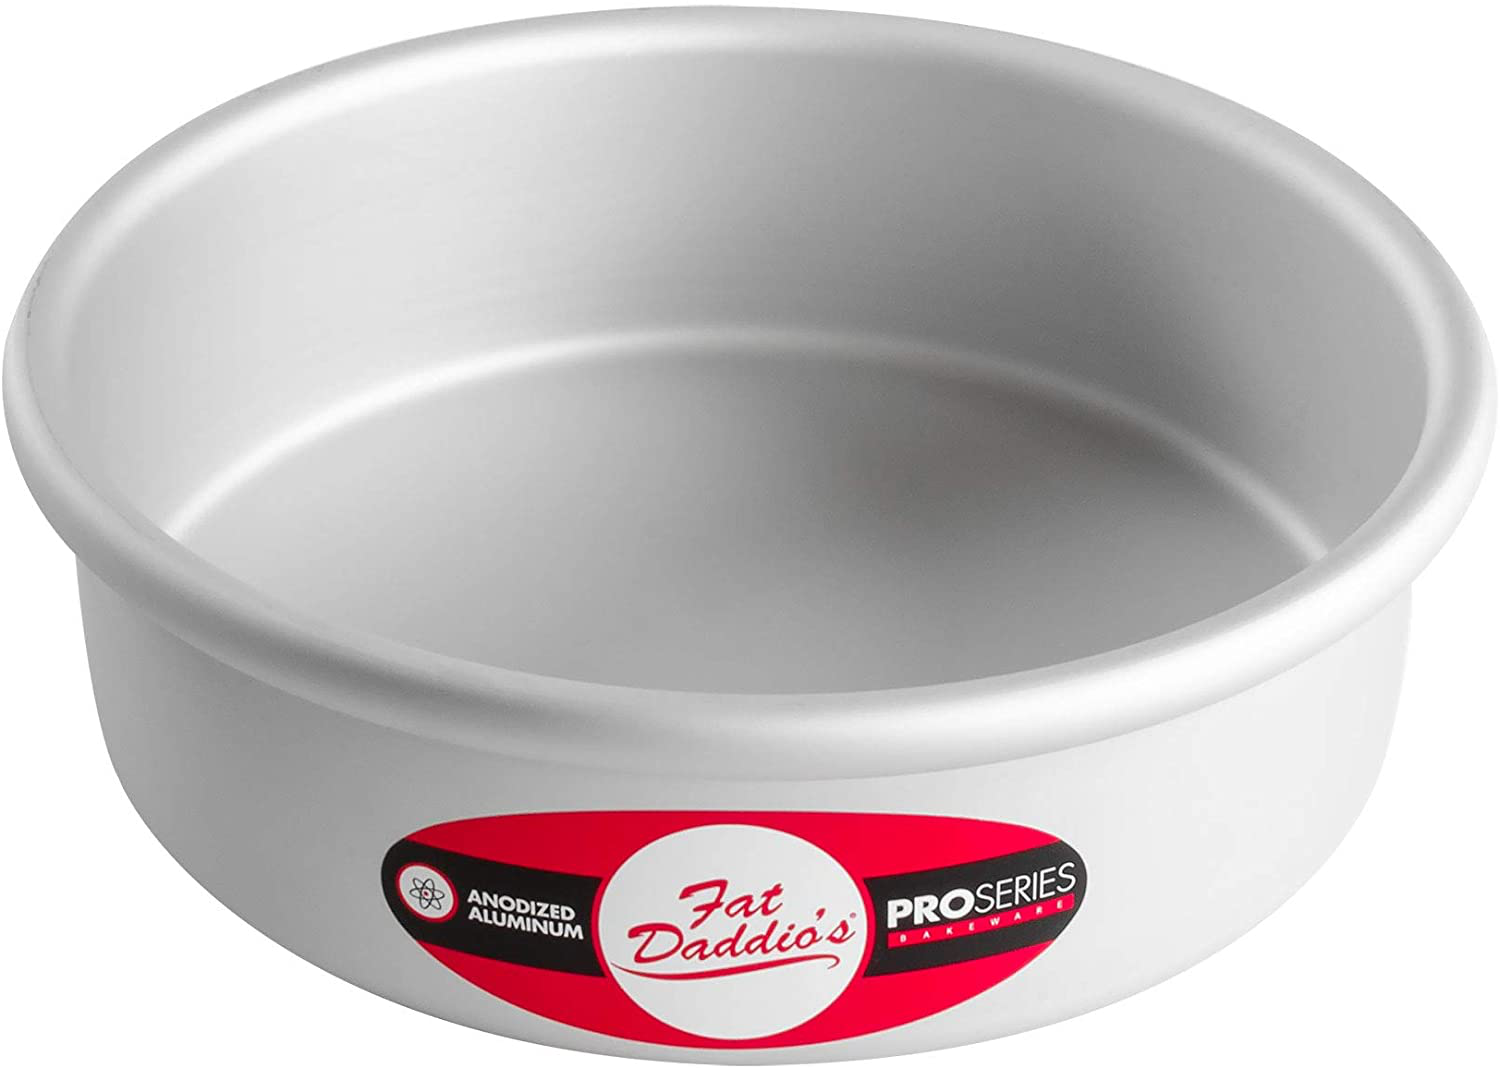 Fat Daddio's Anodized Aluminum Round Cake Pan, 7 x 2 Inch, Silver